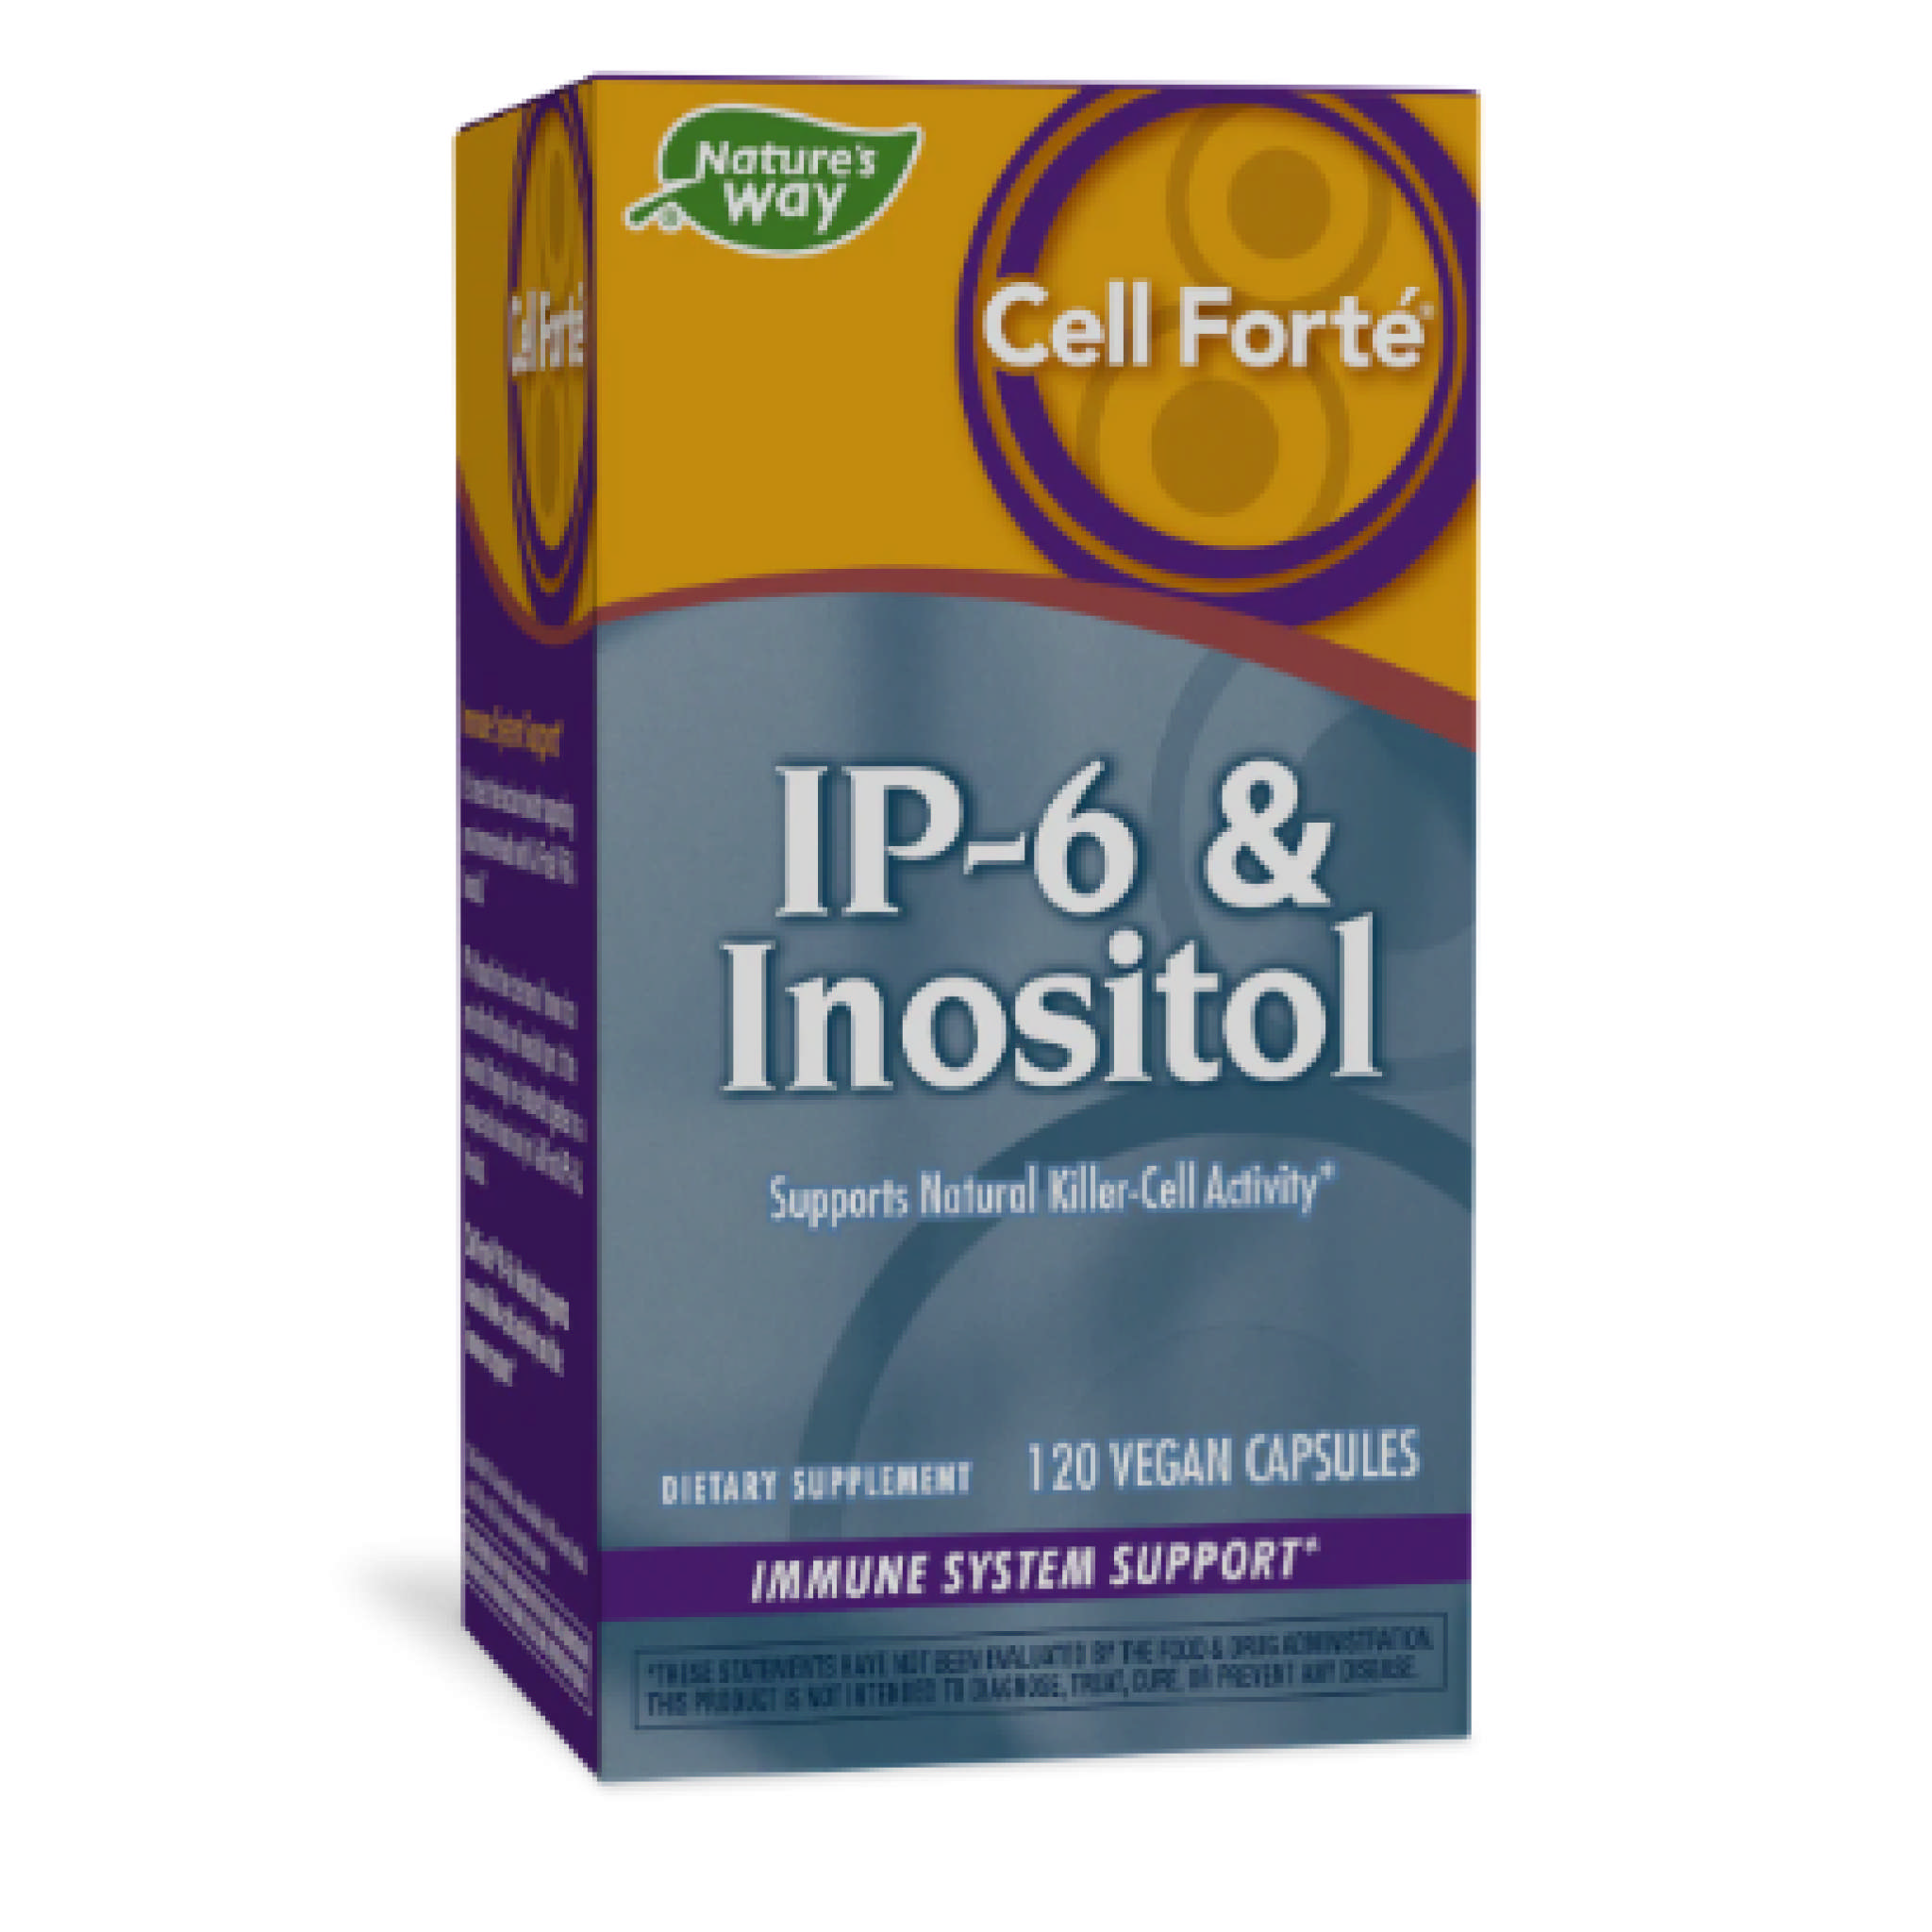 Natures Way Vitamin - Cell Forte W/Ip 6 & Inositol